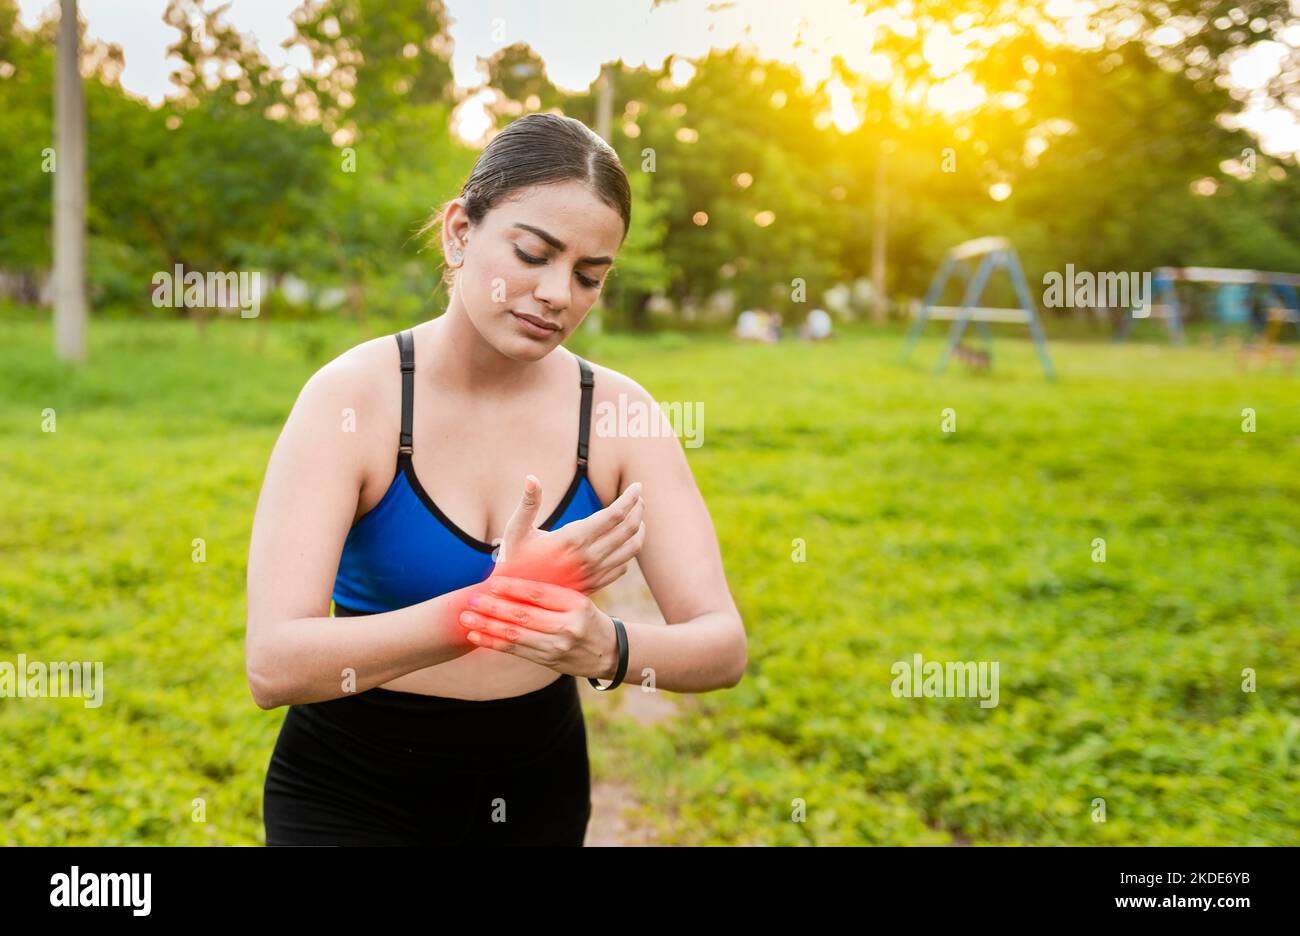 Fitness woman with wrist pain. Sport muscle injury concept. Runner girl with wrist pain outdoors. Concept of wrist pain and arthritis in the hands. Stock Photo